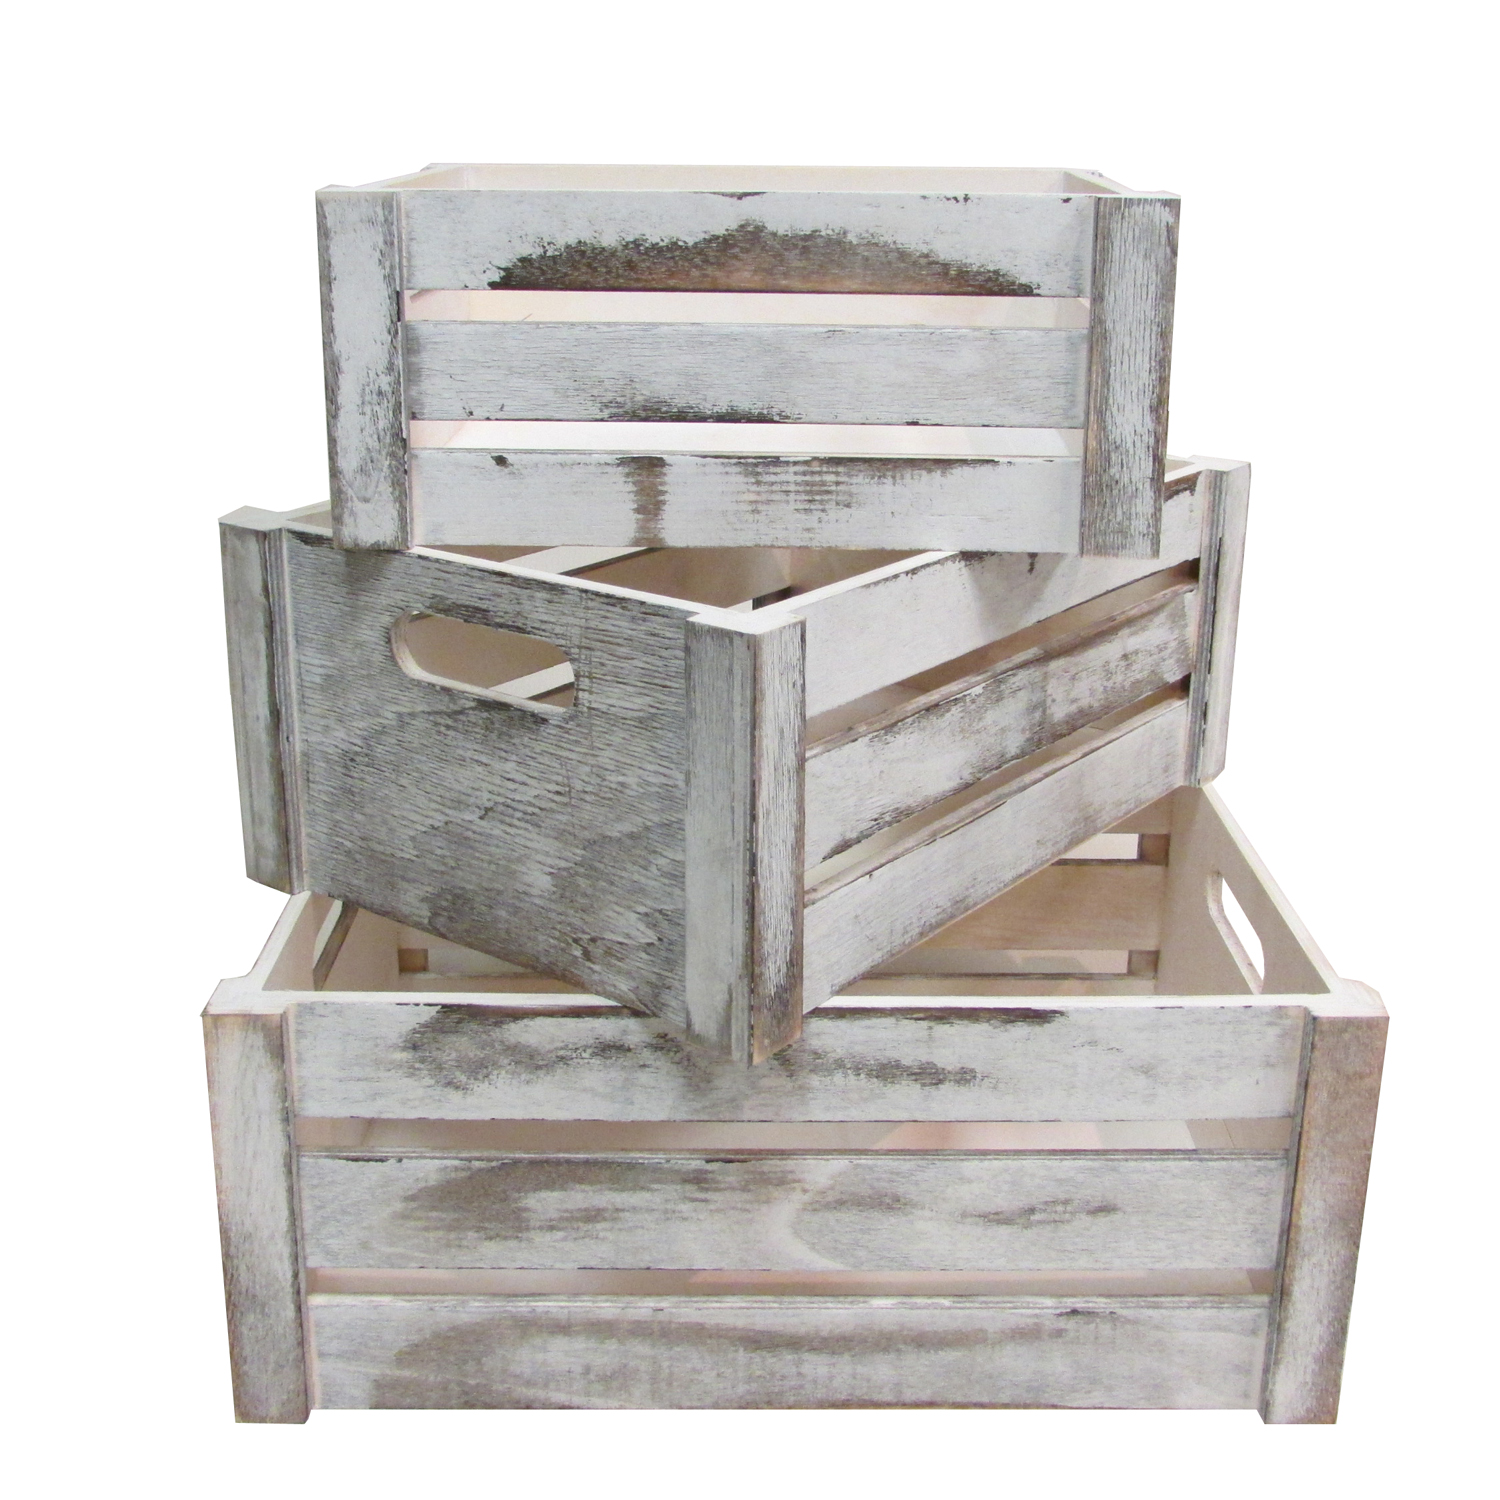 Admired by Nature 0.119 Gallon Wood Storage Crates, Rustic White, 3 Count - image 1 of 6